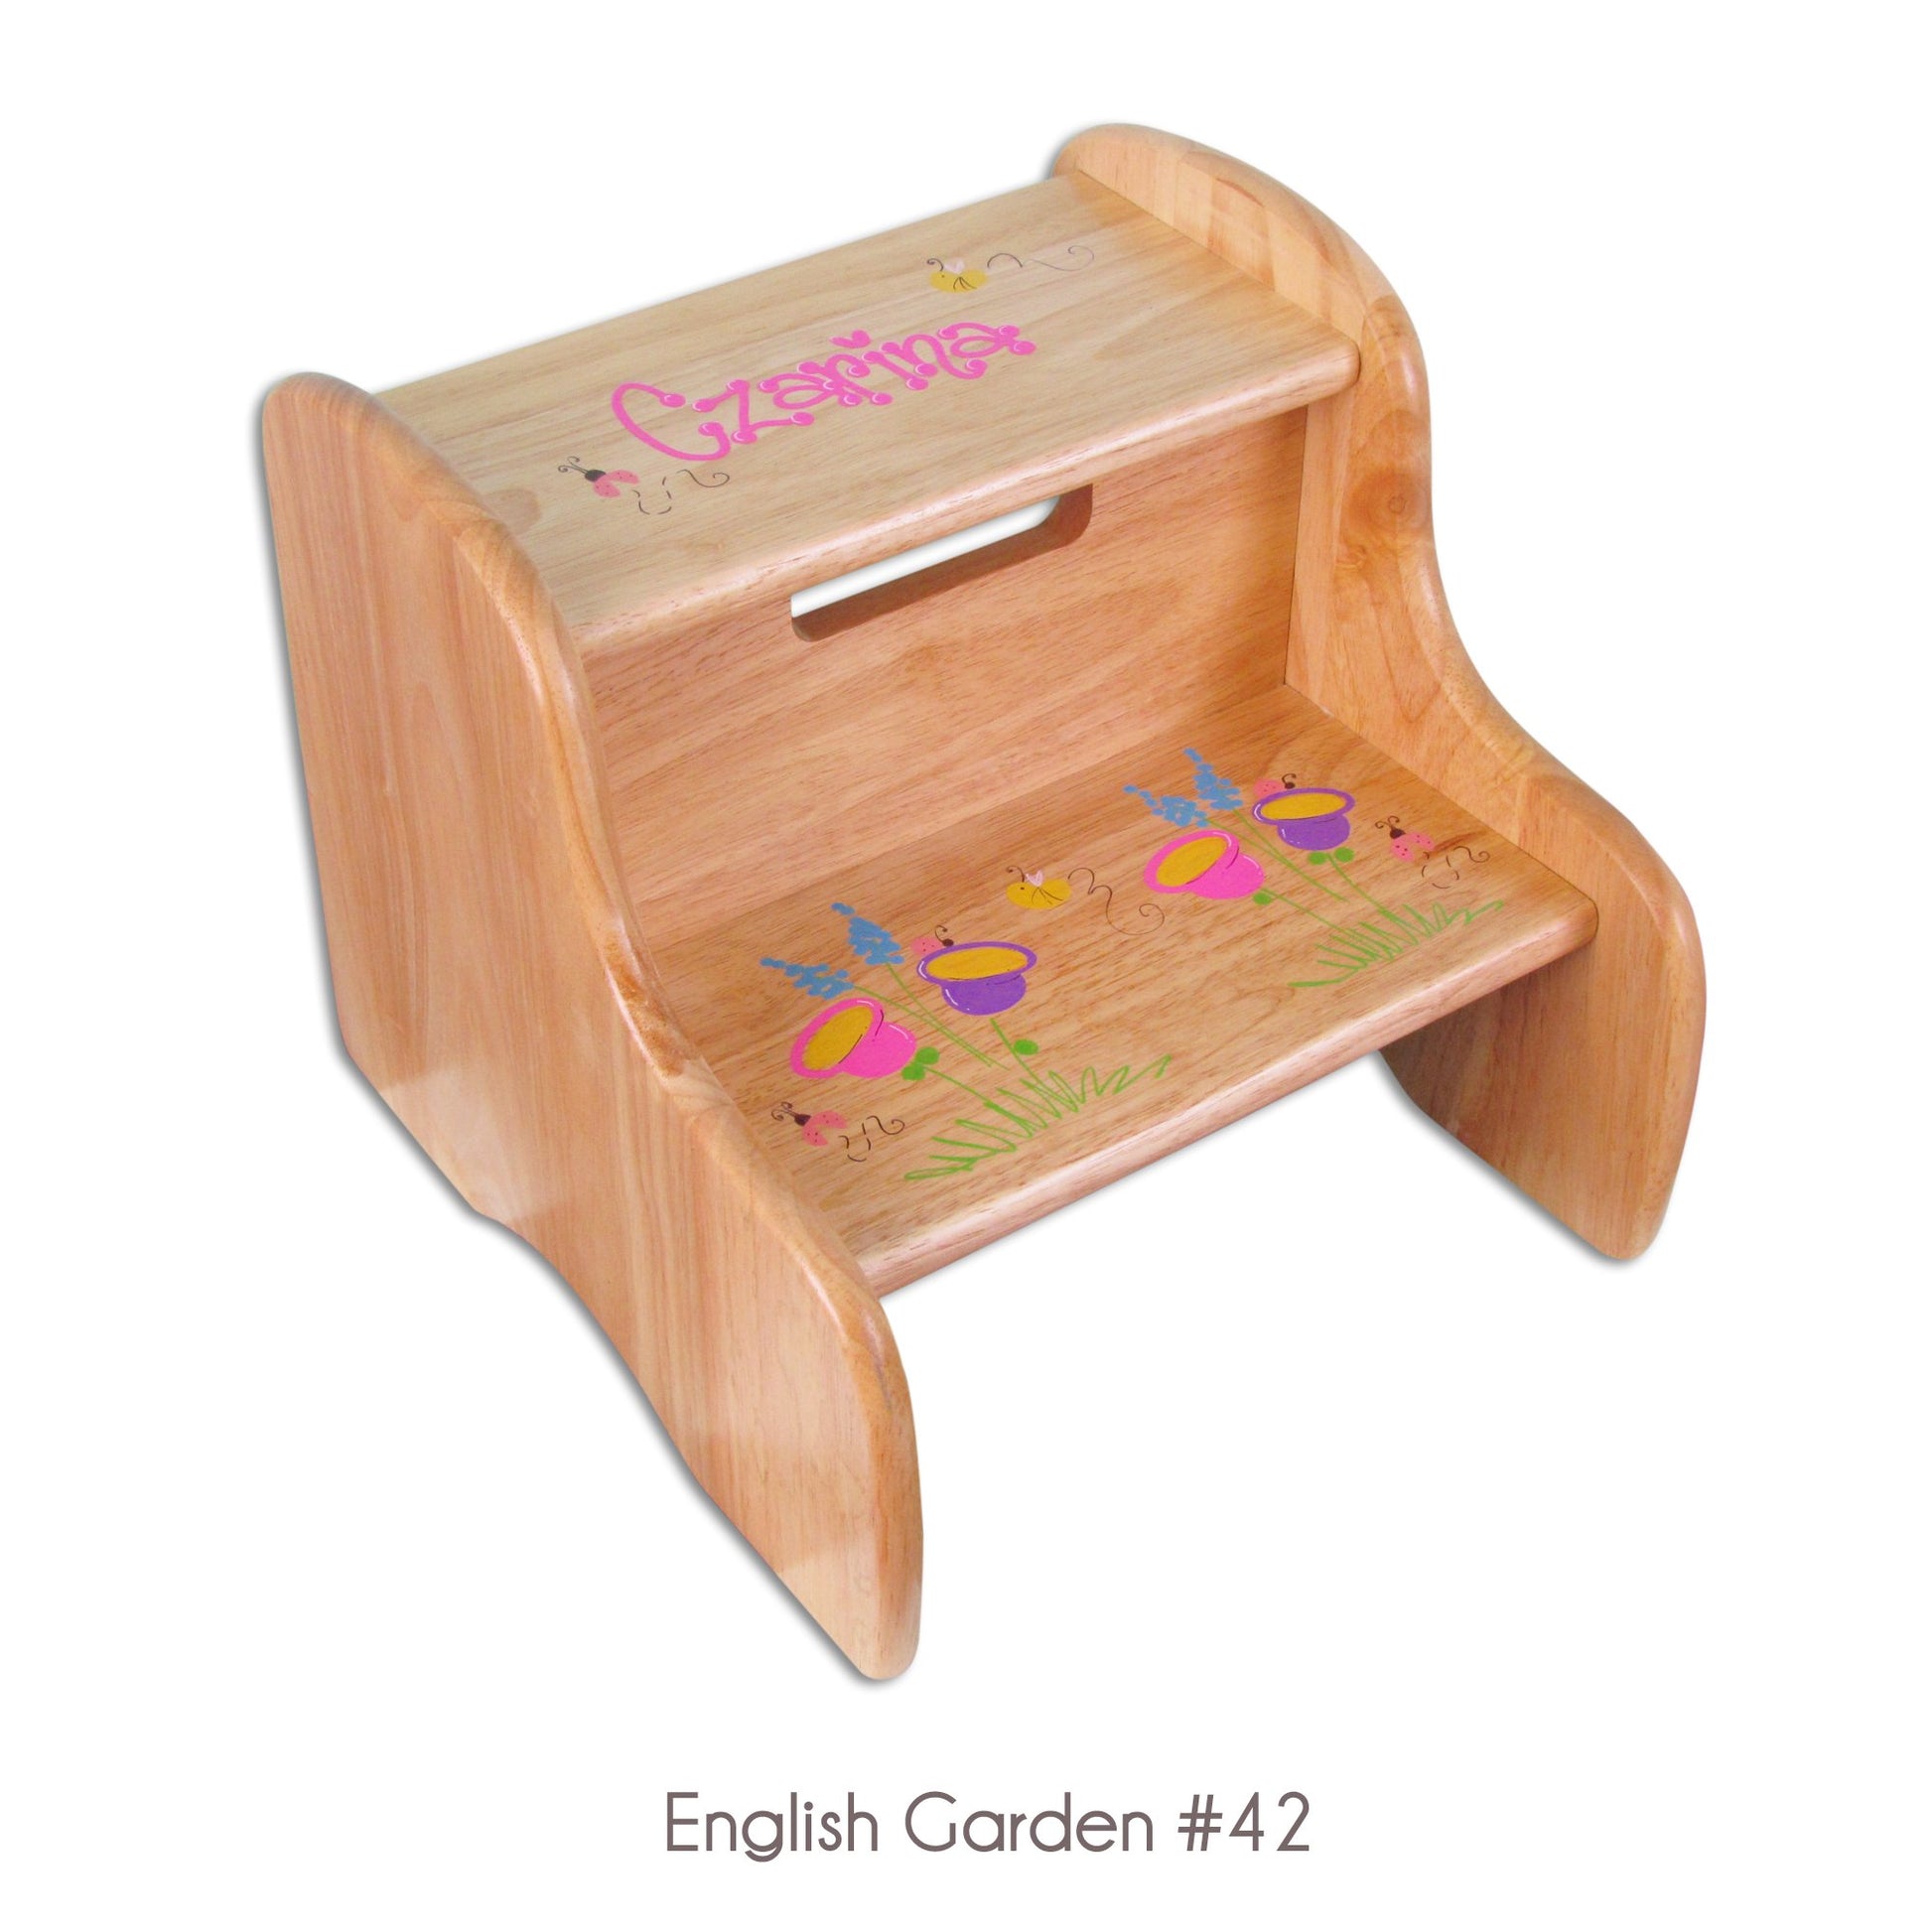 personalized fixed step stool